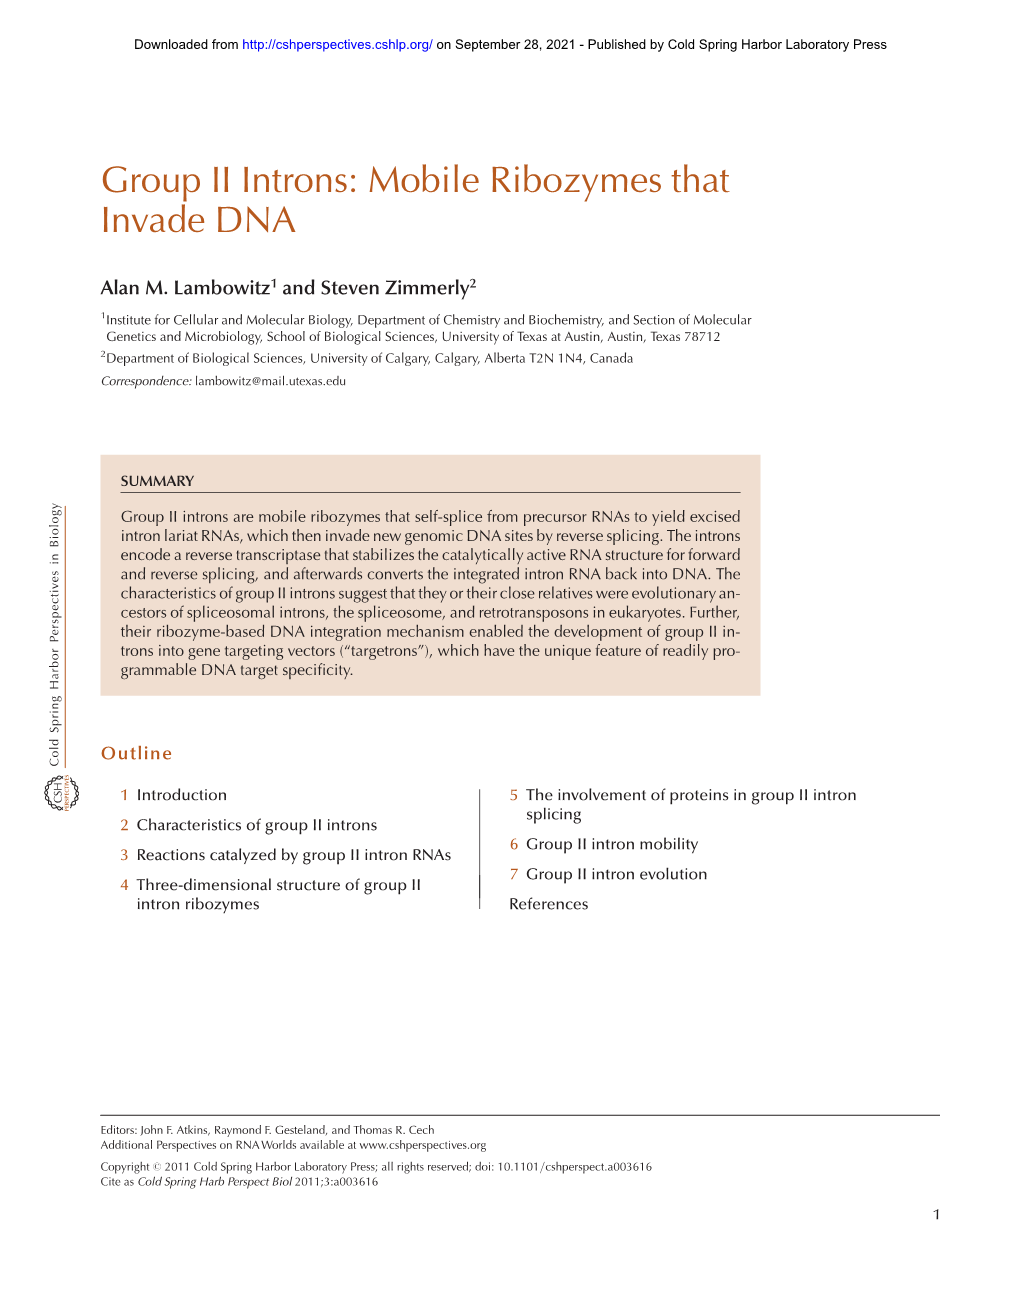 Group II Introns: Mobile Ribozymes That Invade DNA